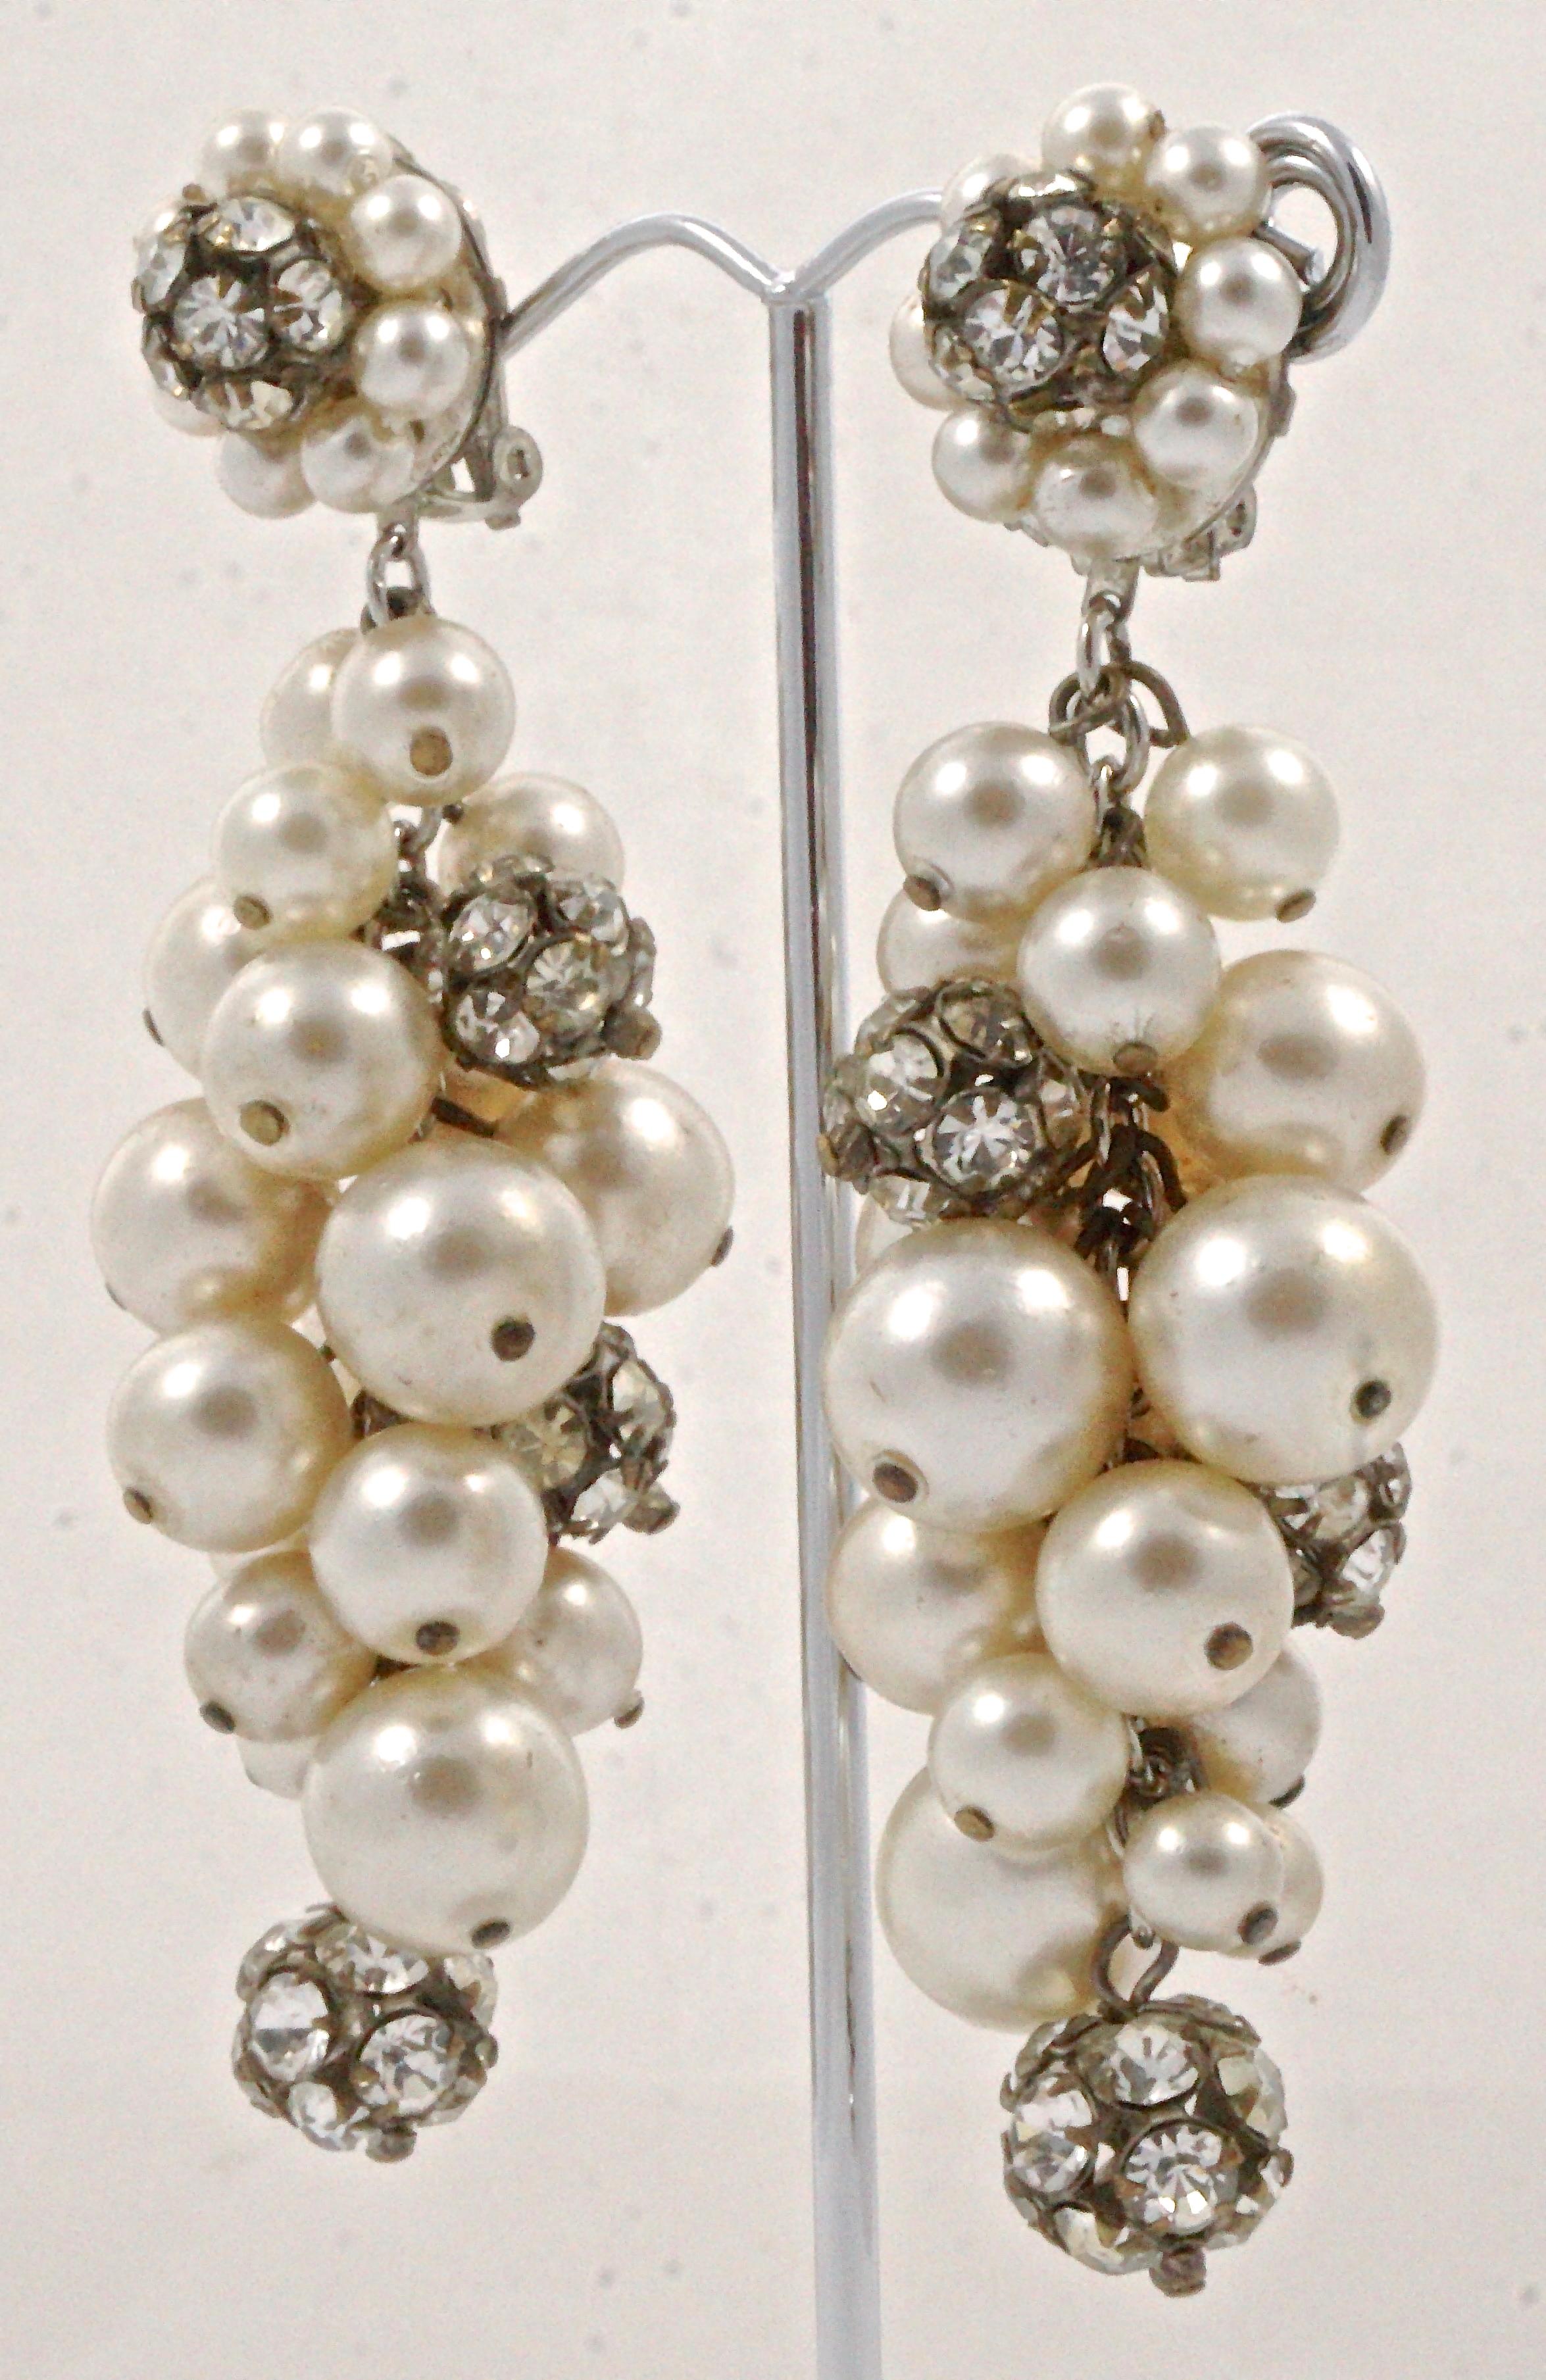 Glamorous vintage silver tone and bronze tone clip on drop earrings, featuring clusters of cream faux pearls and rhinestone balls. Measuring length 8.5cm / 3.34 inches, circa 1960s. The clips work well, there is wear to the silver plating, and some